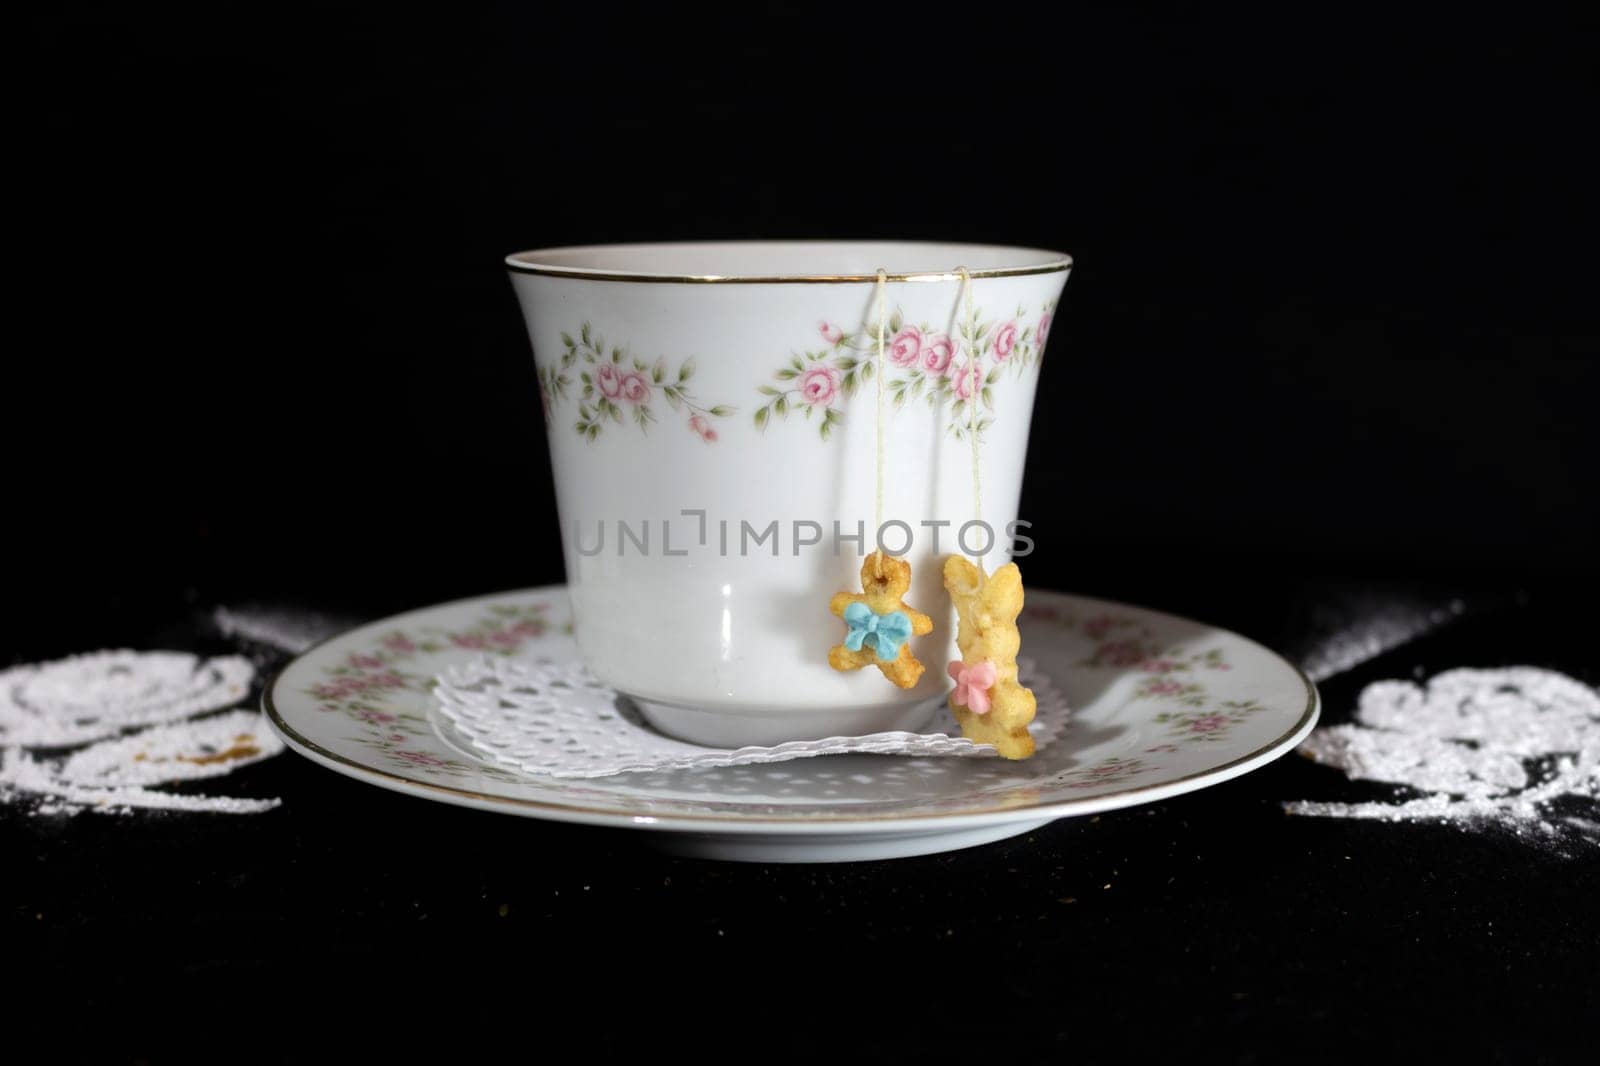 Classic cup of tea surrounded by two white roses made with icing sugar and a rabbit-shaped sweet that hangs over the cup. High quality photo